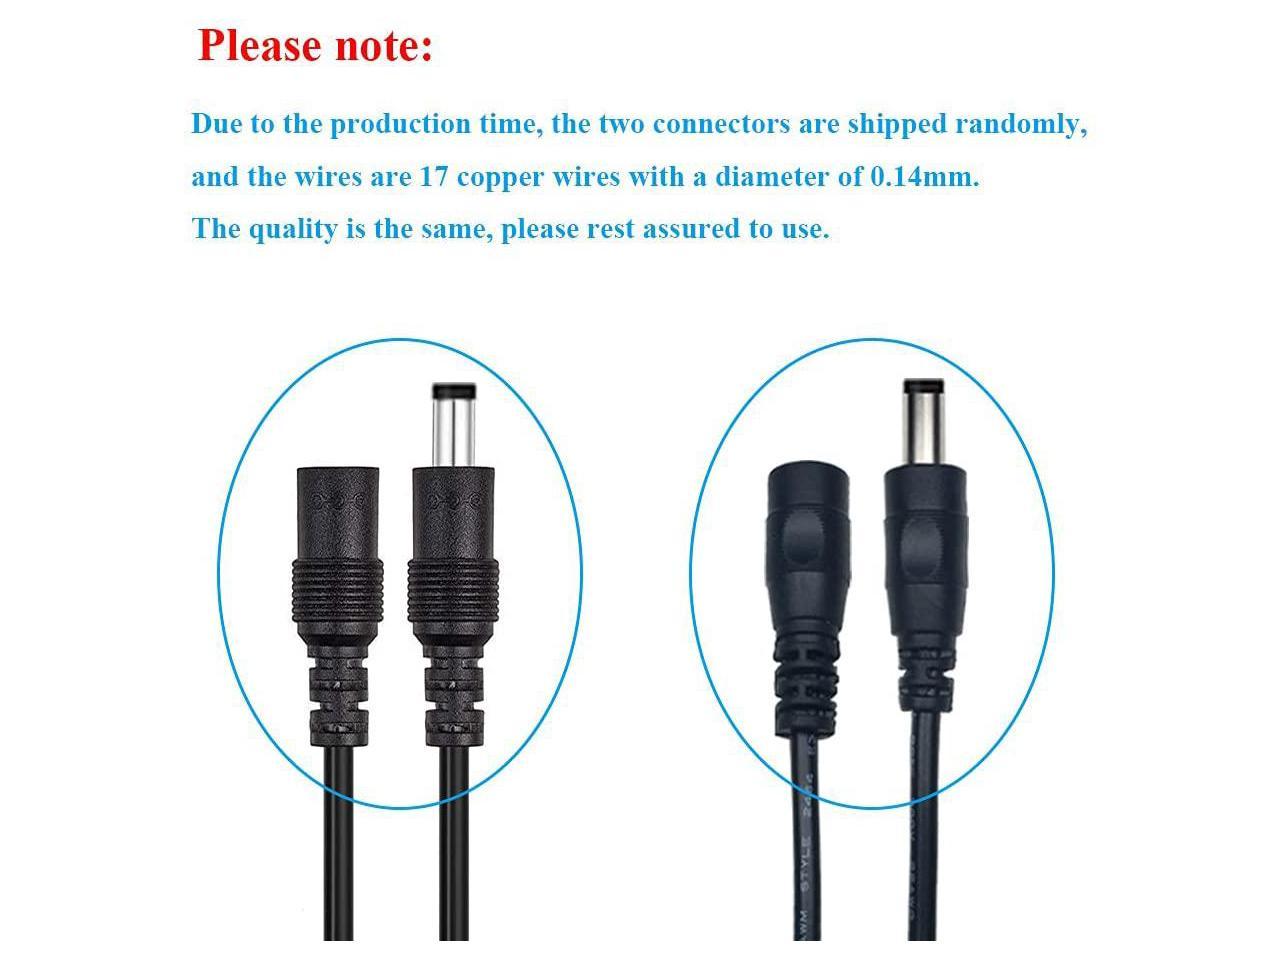 12V DC Power Adapter Plug Extension Cord 5.5mm x 2.1mm Male to Female Extension Wire for DC 12V Power Adapter CCTV Security Camera etc - White Liwinting 2pcs 2m/6.56Feet DC Extension Cable 